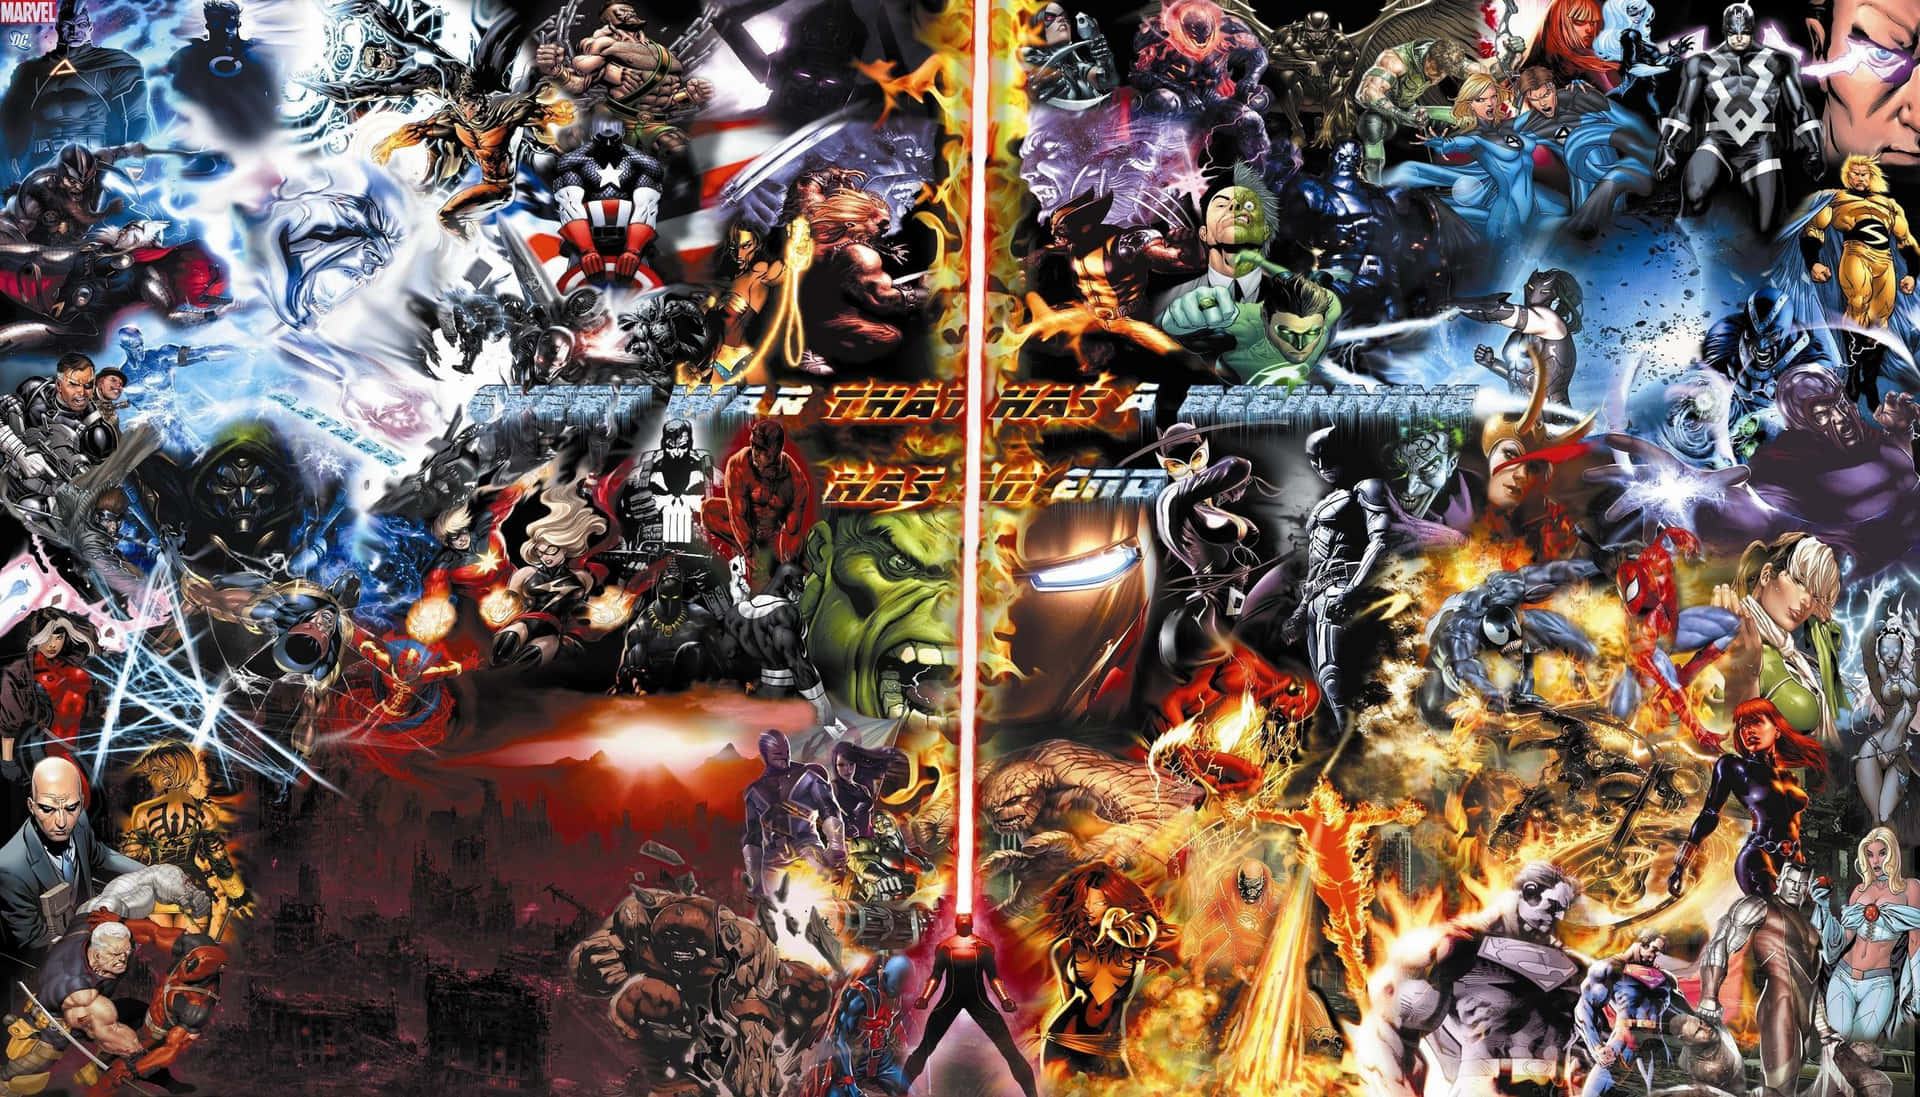 Unite! Superheroes come together in one collage. Wallpaper